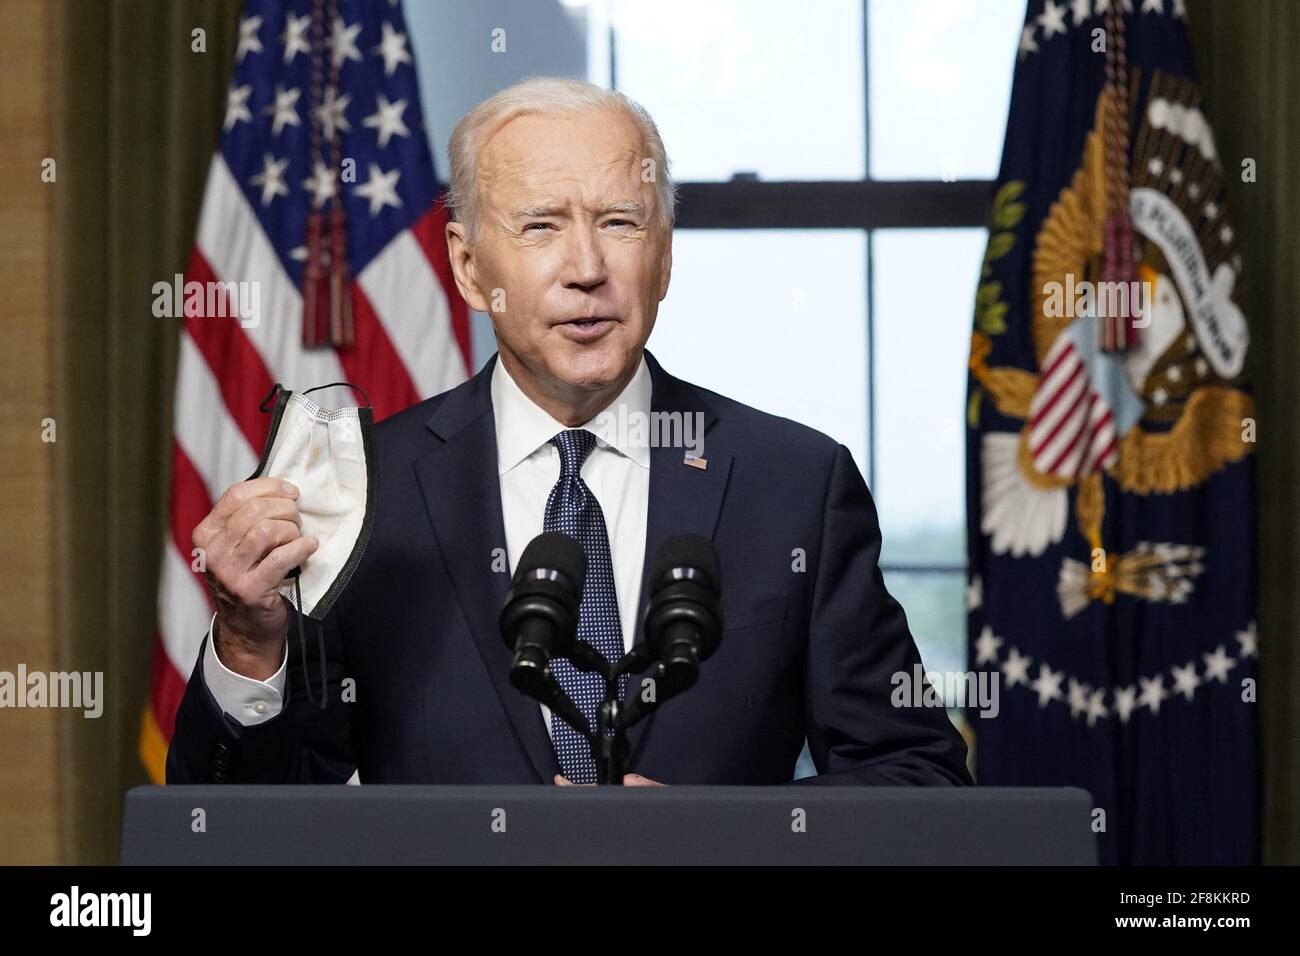 Washington, United States. 14th Apr, 2021. President Joe Biden speaks from the Treaty Room in the White House on Wednesday, April 14, 2021 about the withdrawal of the remainder of U.S. troops from Afghanistan. Pool Photo by Andrew Harnik/UPI Credit: UPI/Alamy Live News Stock Photo